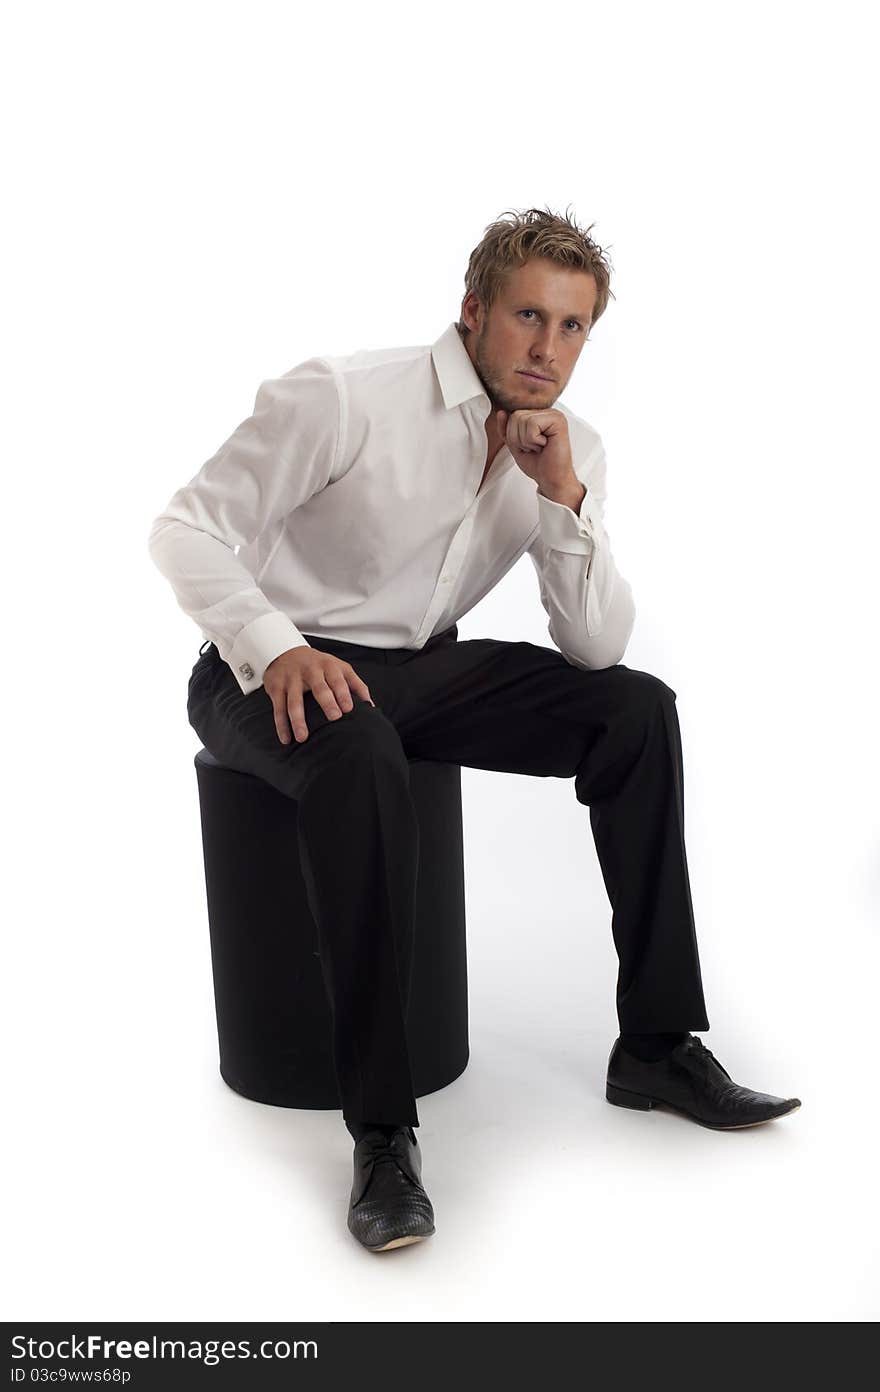 Image showing casual looking business type man isolated against white. Image showing casual looking business type man isolated against white